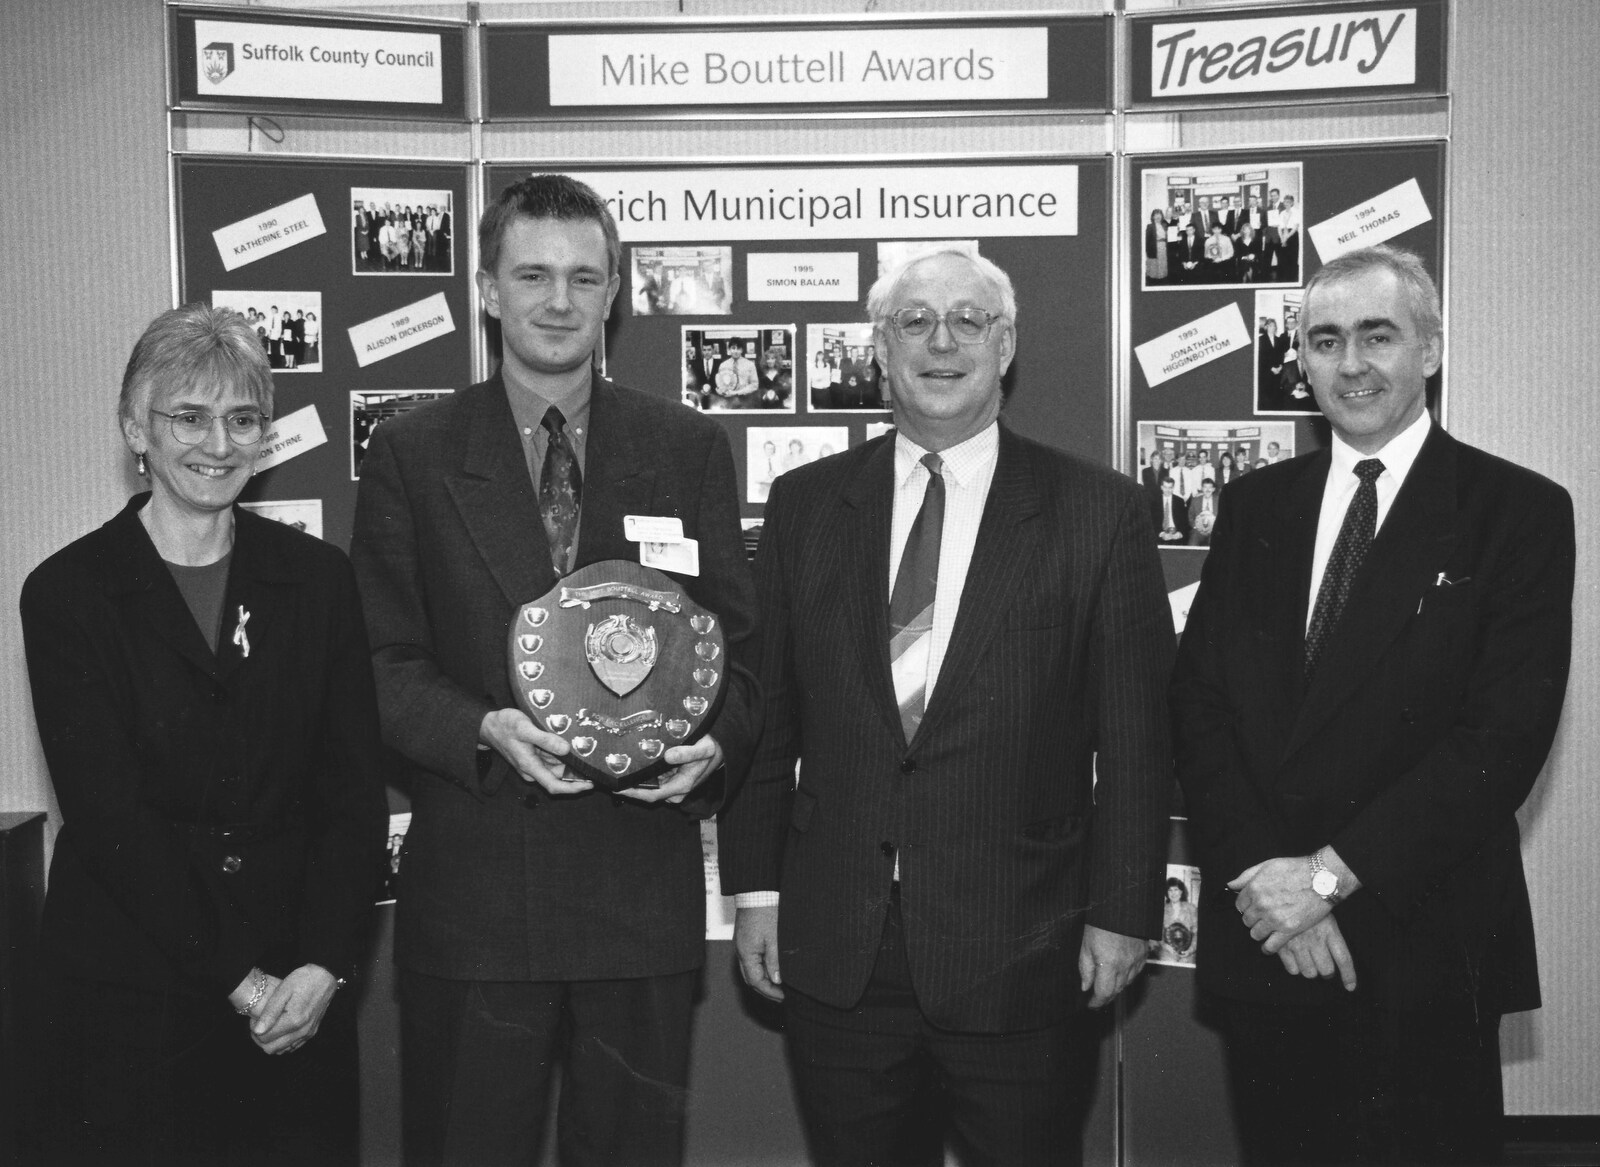 A photo with the treasurer from The CISU Awards Season, Suffolk County Council, Ipswich - 21st May 1998